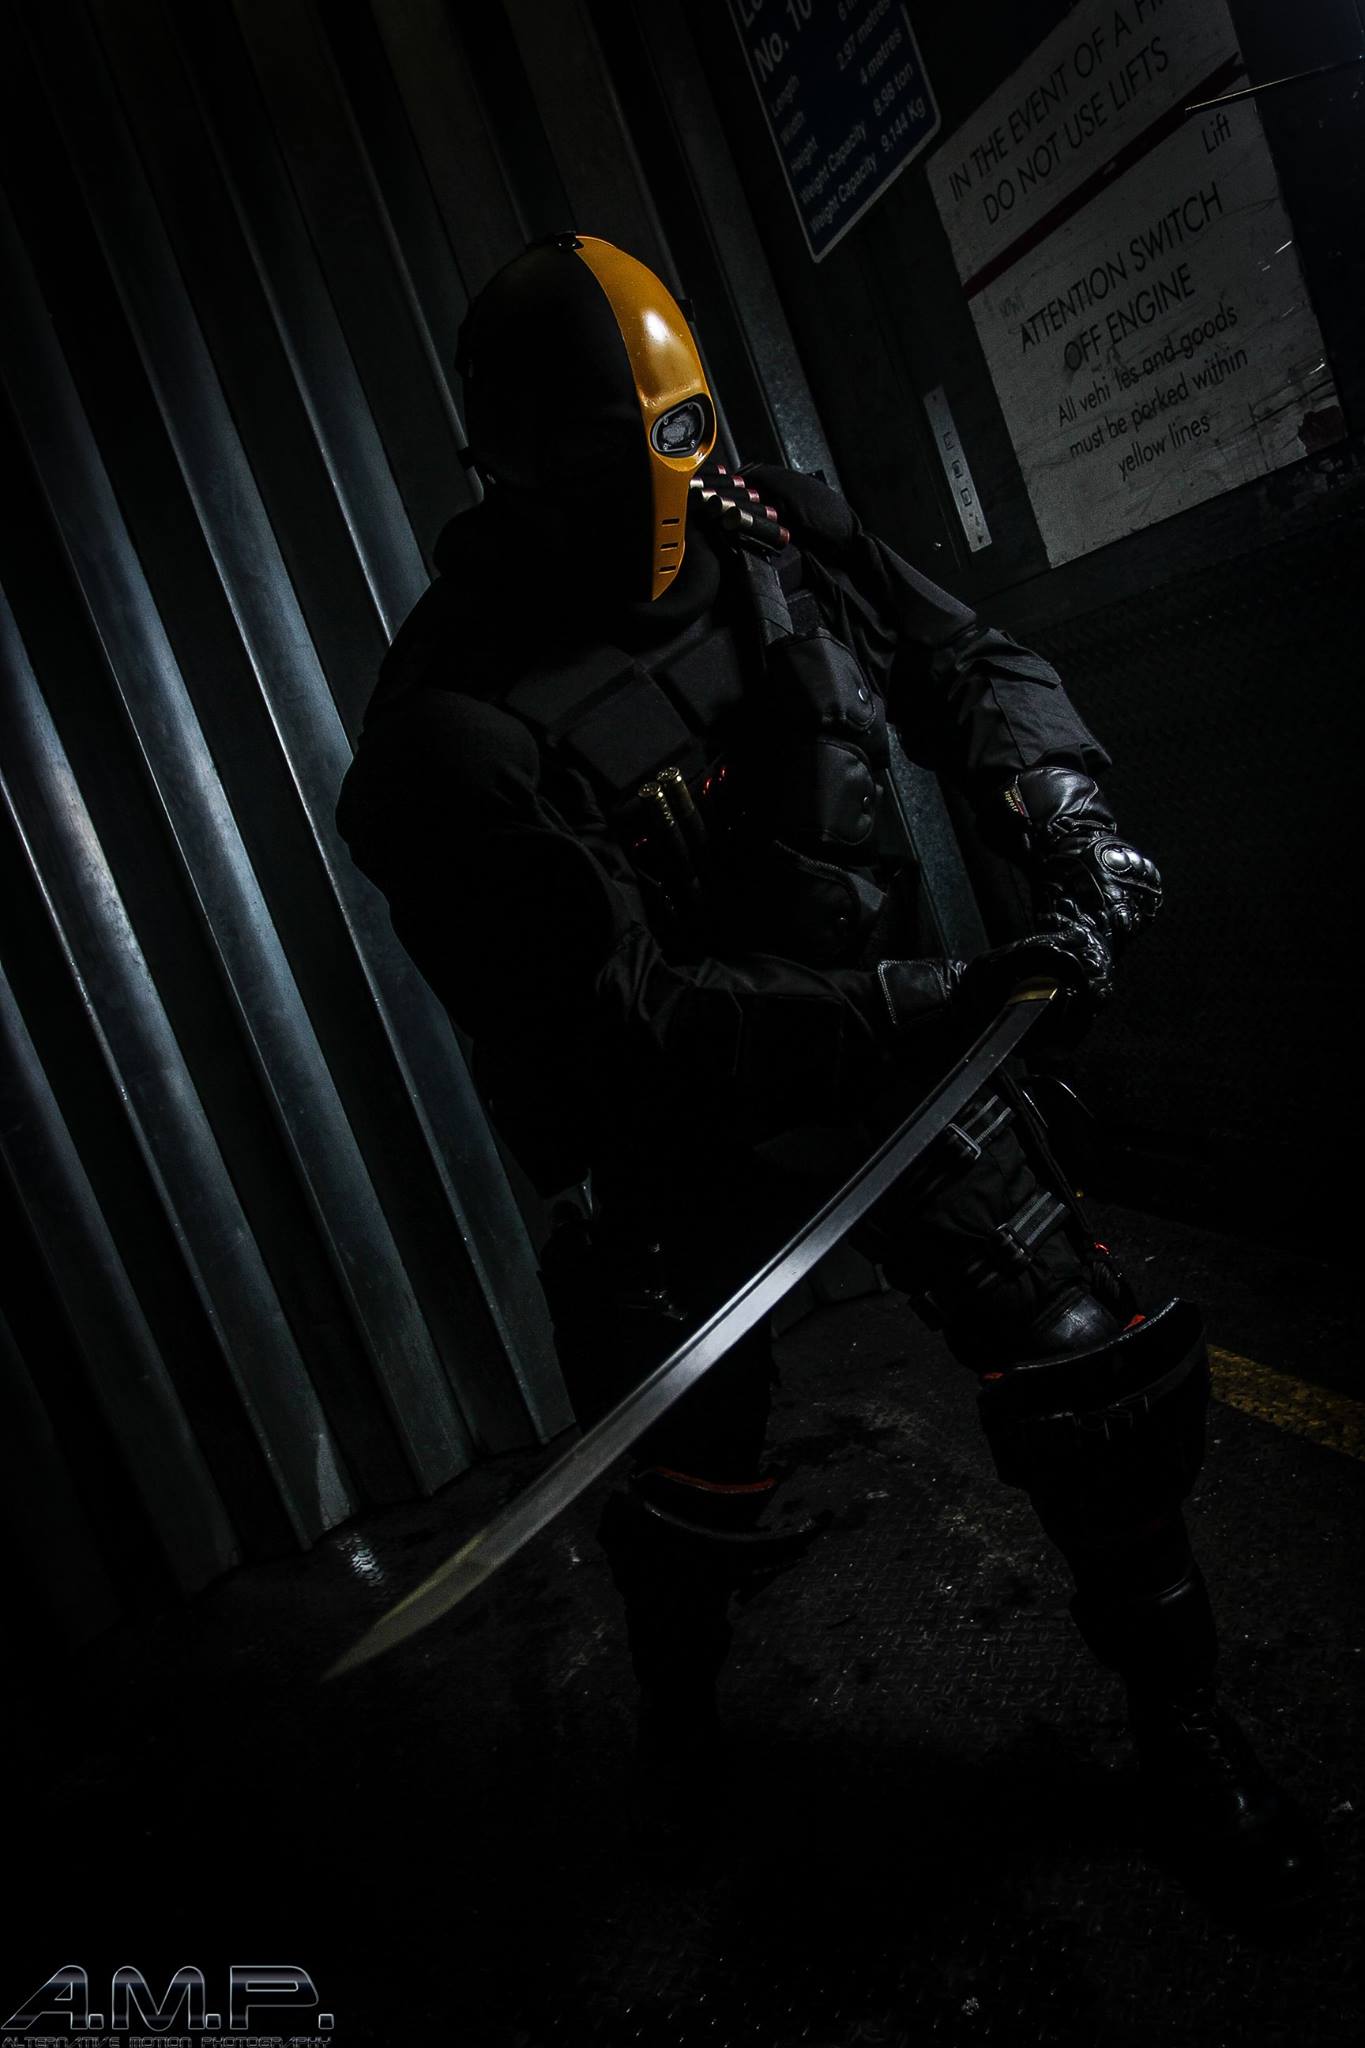 On the hunt for the Batman. Featuring: Martin J. Thomas as Deathstroke with the Cold Steel Warrior Series Katana.